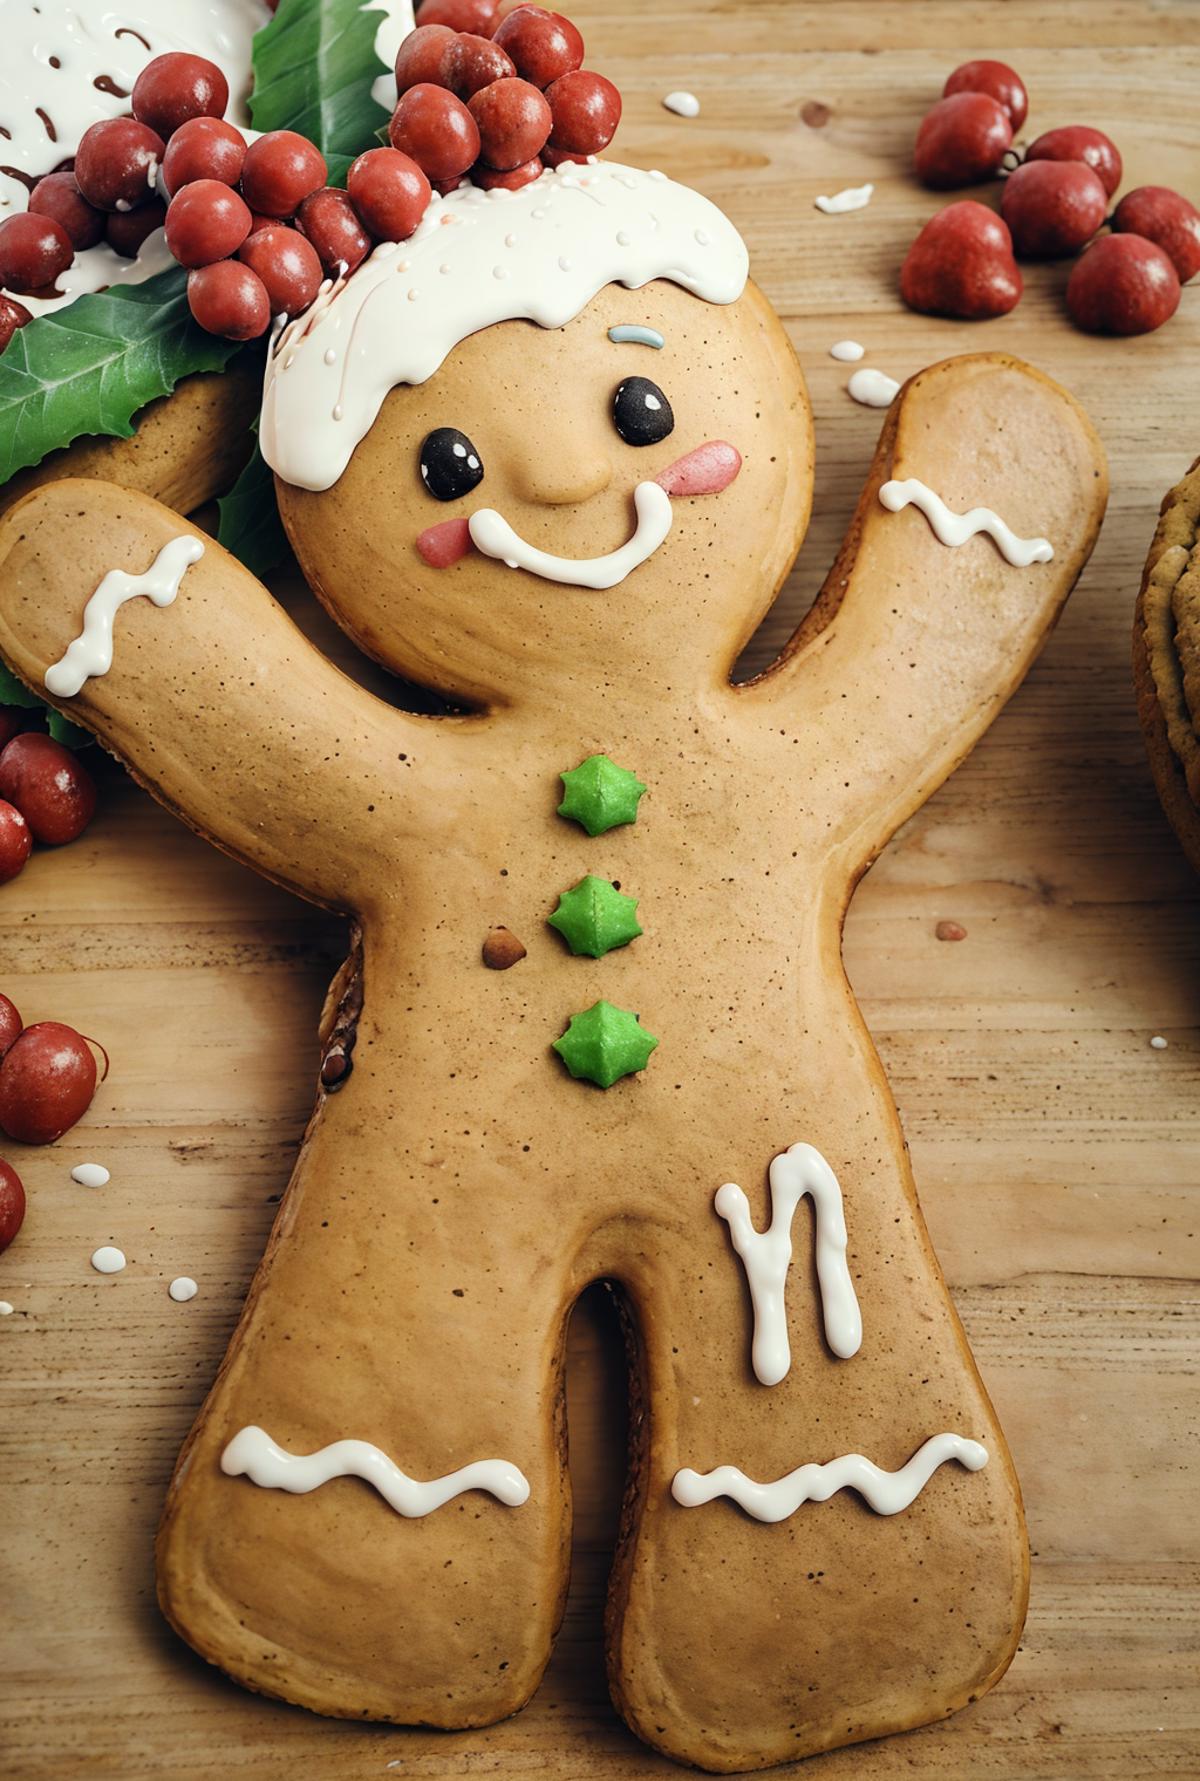 GCP - Gingerbread Cookie People (Concept) image by fansay